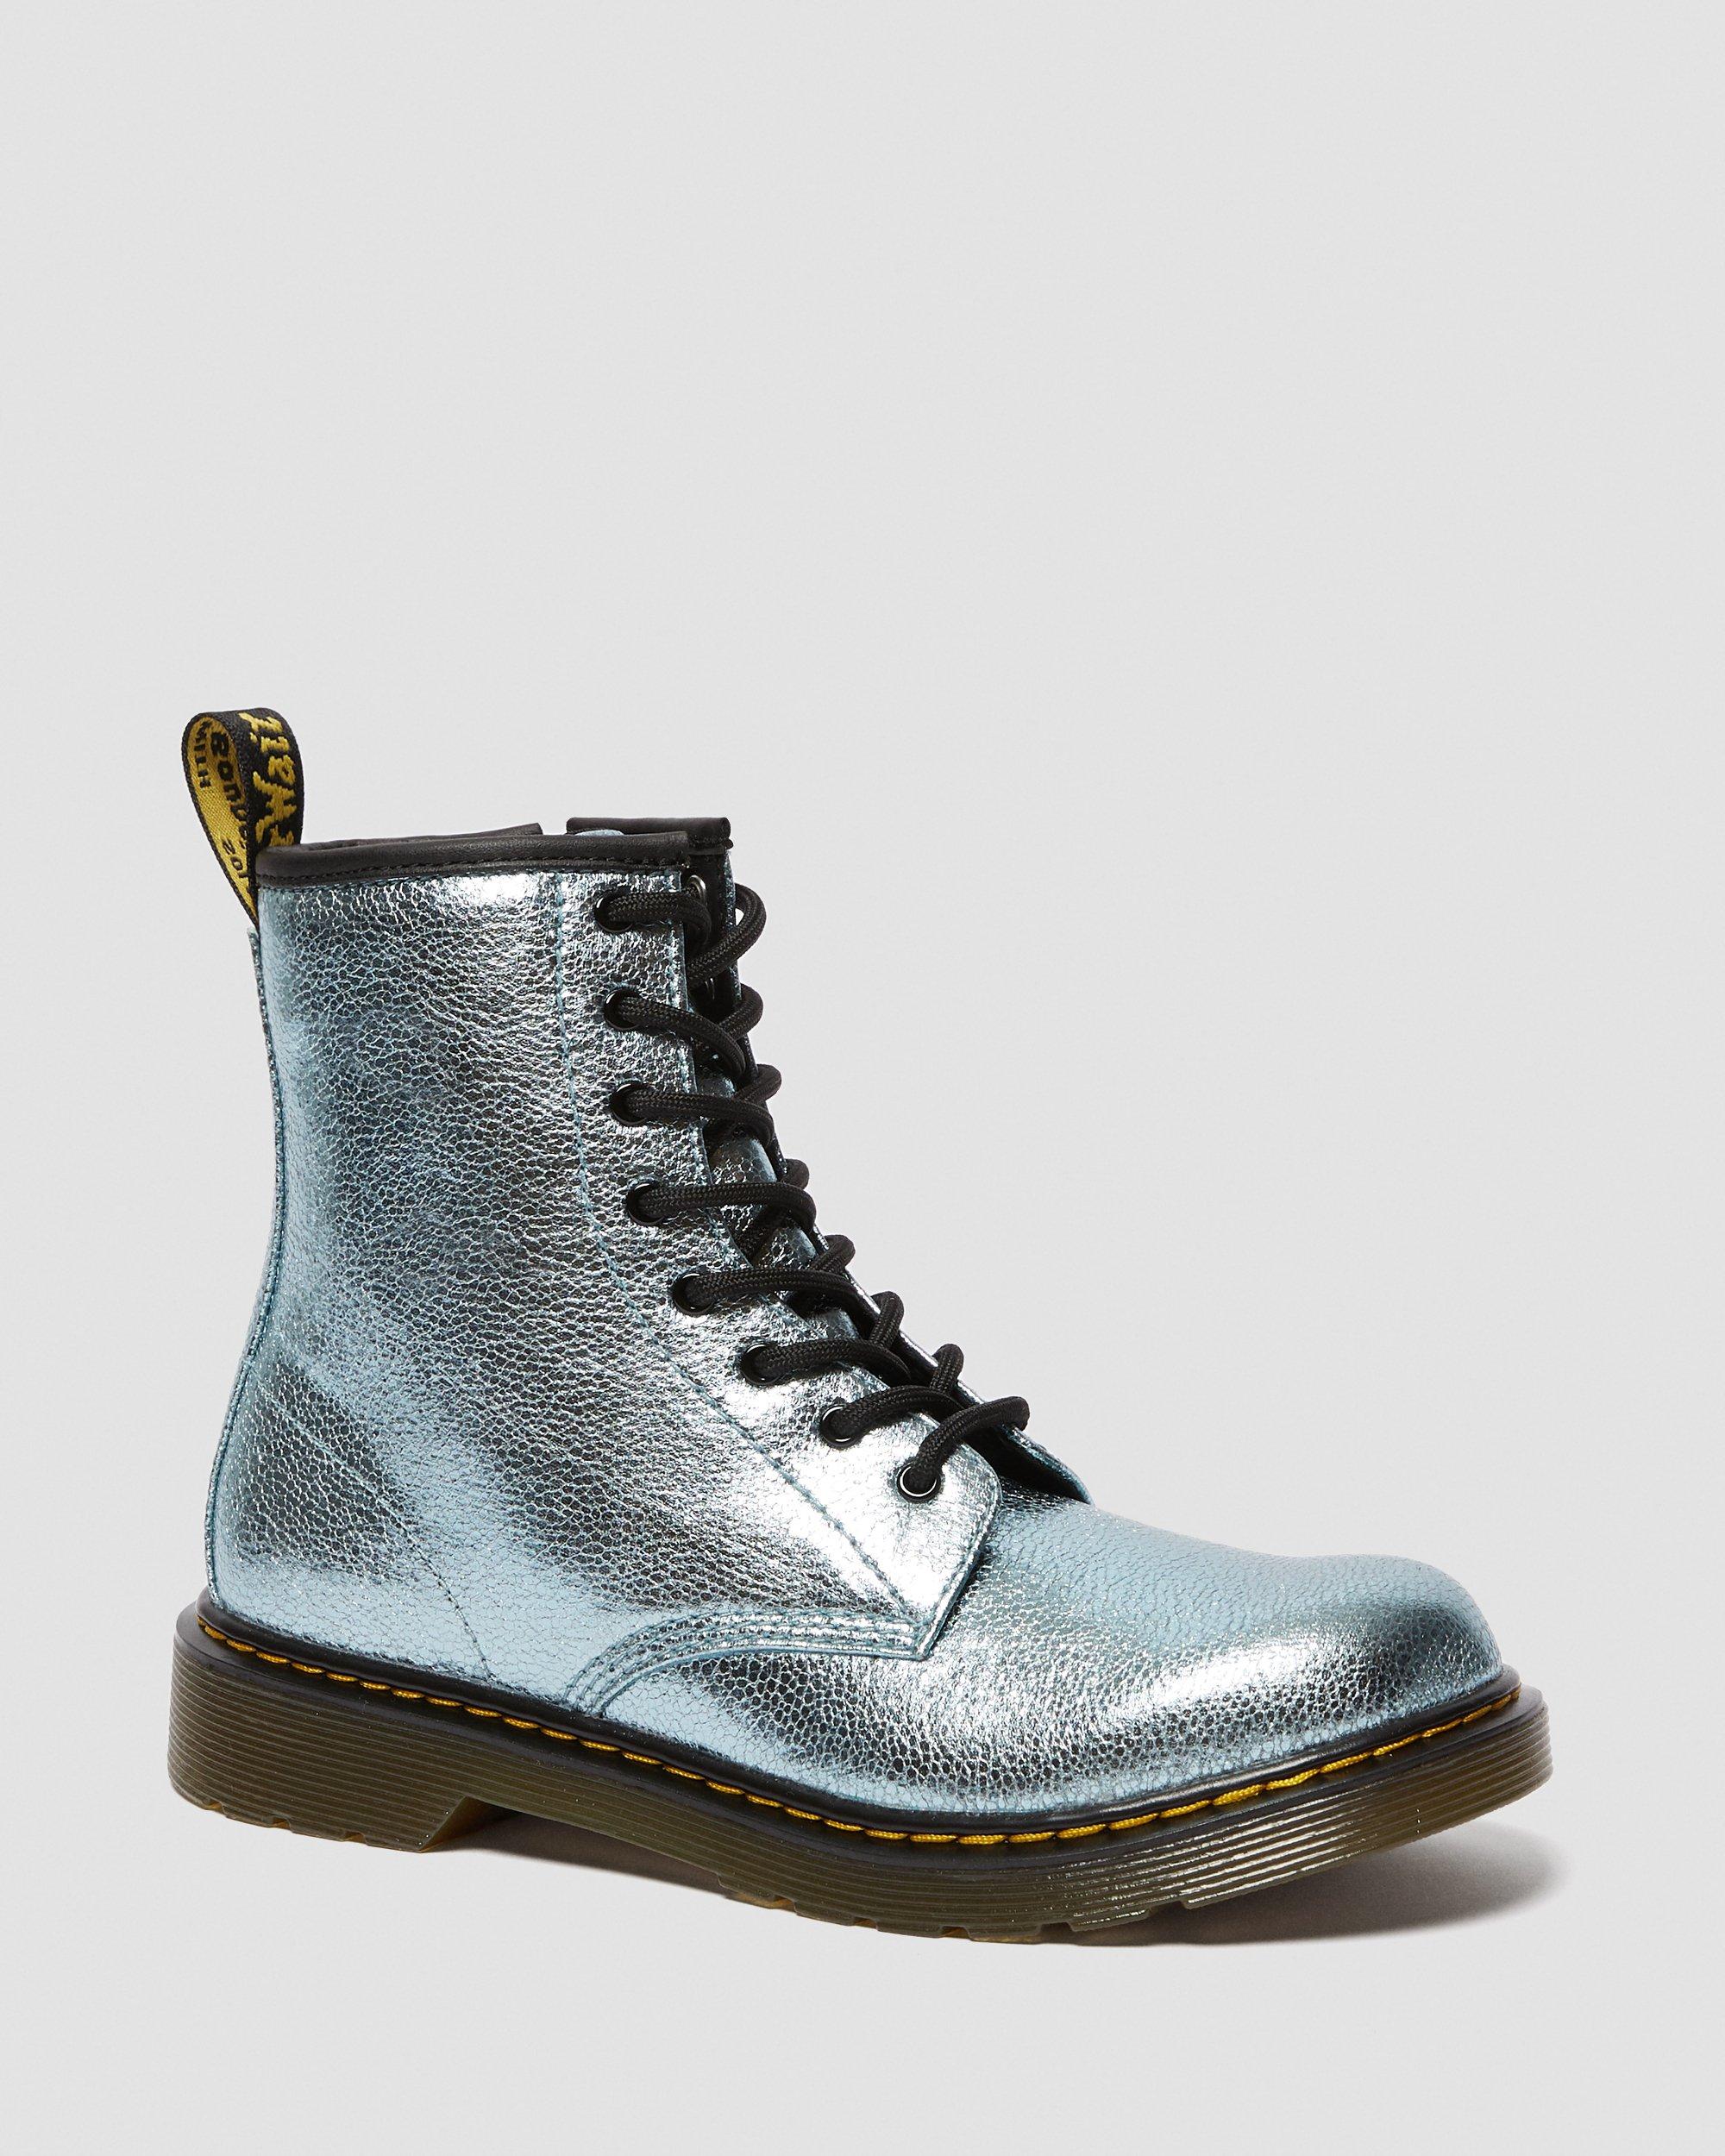 Th Weg huis Perth Blackborough Youth 1460 Crinkle Metallic Lace Up Boots | Dr. Martens